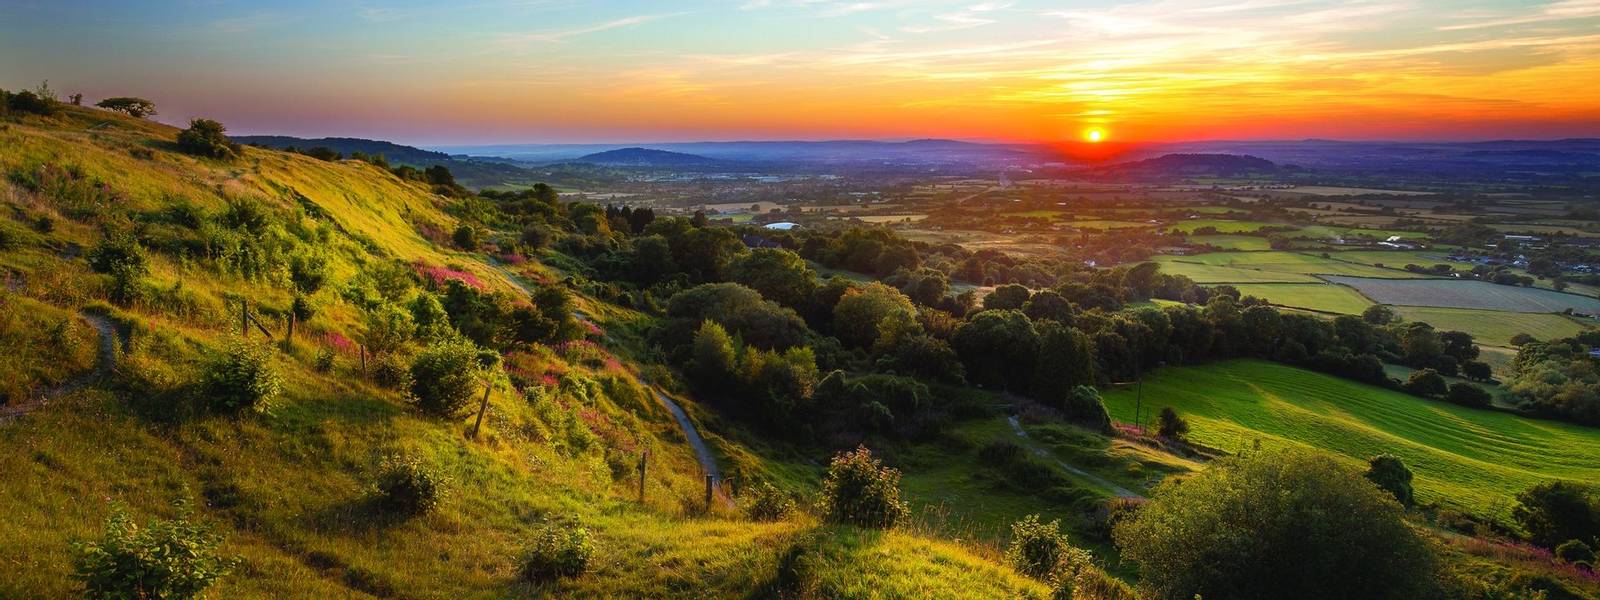 Crickley Hill at Sunset, Cotswold UK